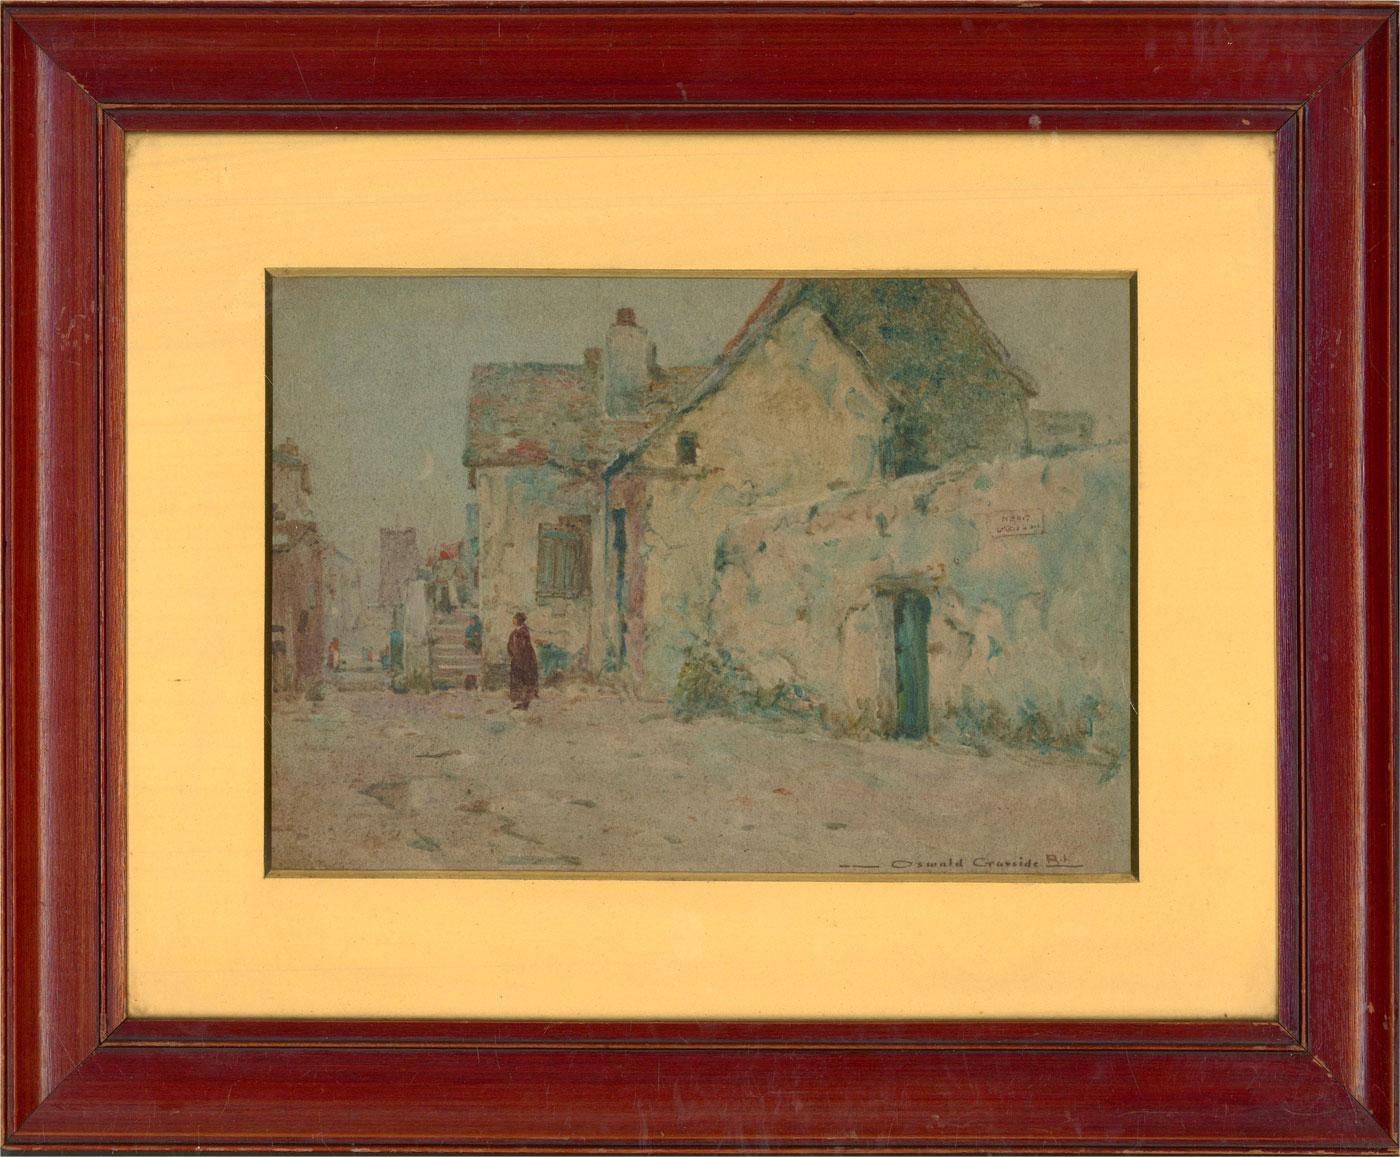 A charming watercolour painting by the artist Oswald Garside, depicting a village street scene with figures. Signed to the lower right-hand corner. Presented in a gold card mount and in a wooden frame, as shown. On watercolour paper.
